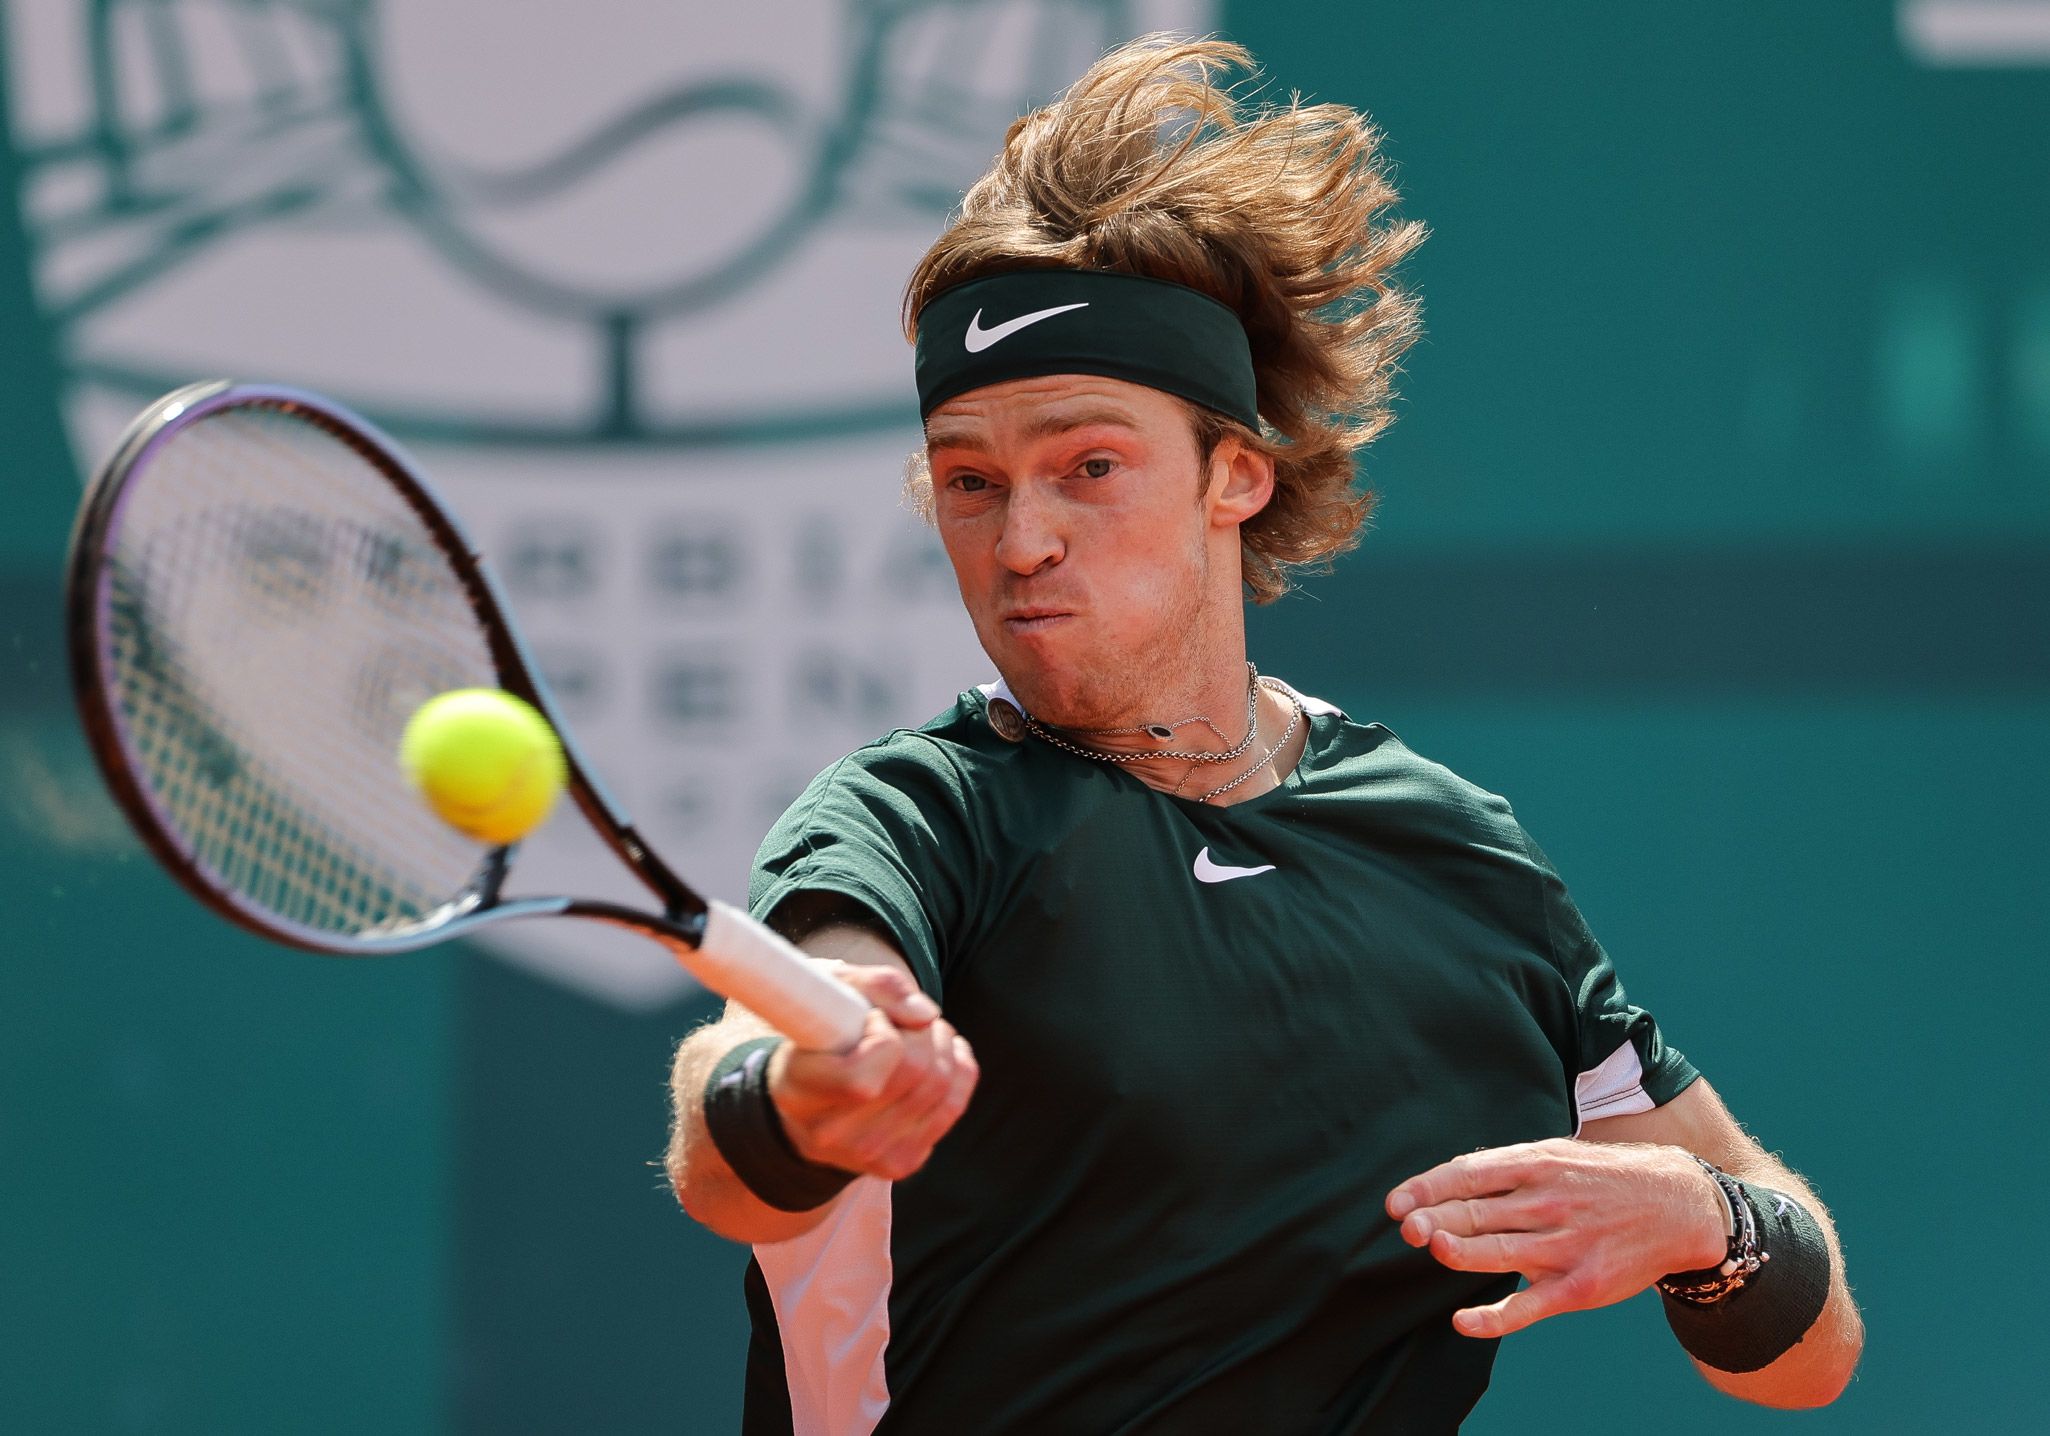 Monte Carlo Masters Highlights Jannik Sinner, Andrey Rublev, Holger Rune and Taylor Fritz enter semifinals in Monte Carlo Masters 2023